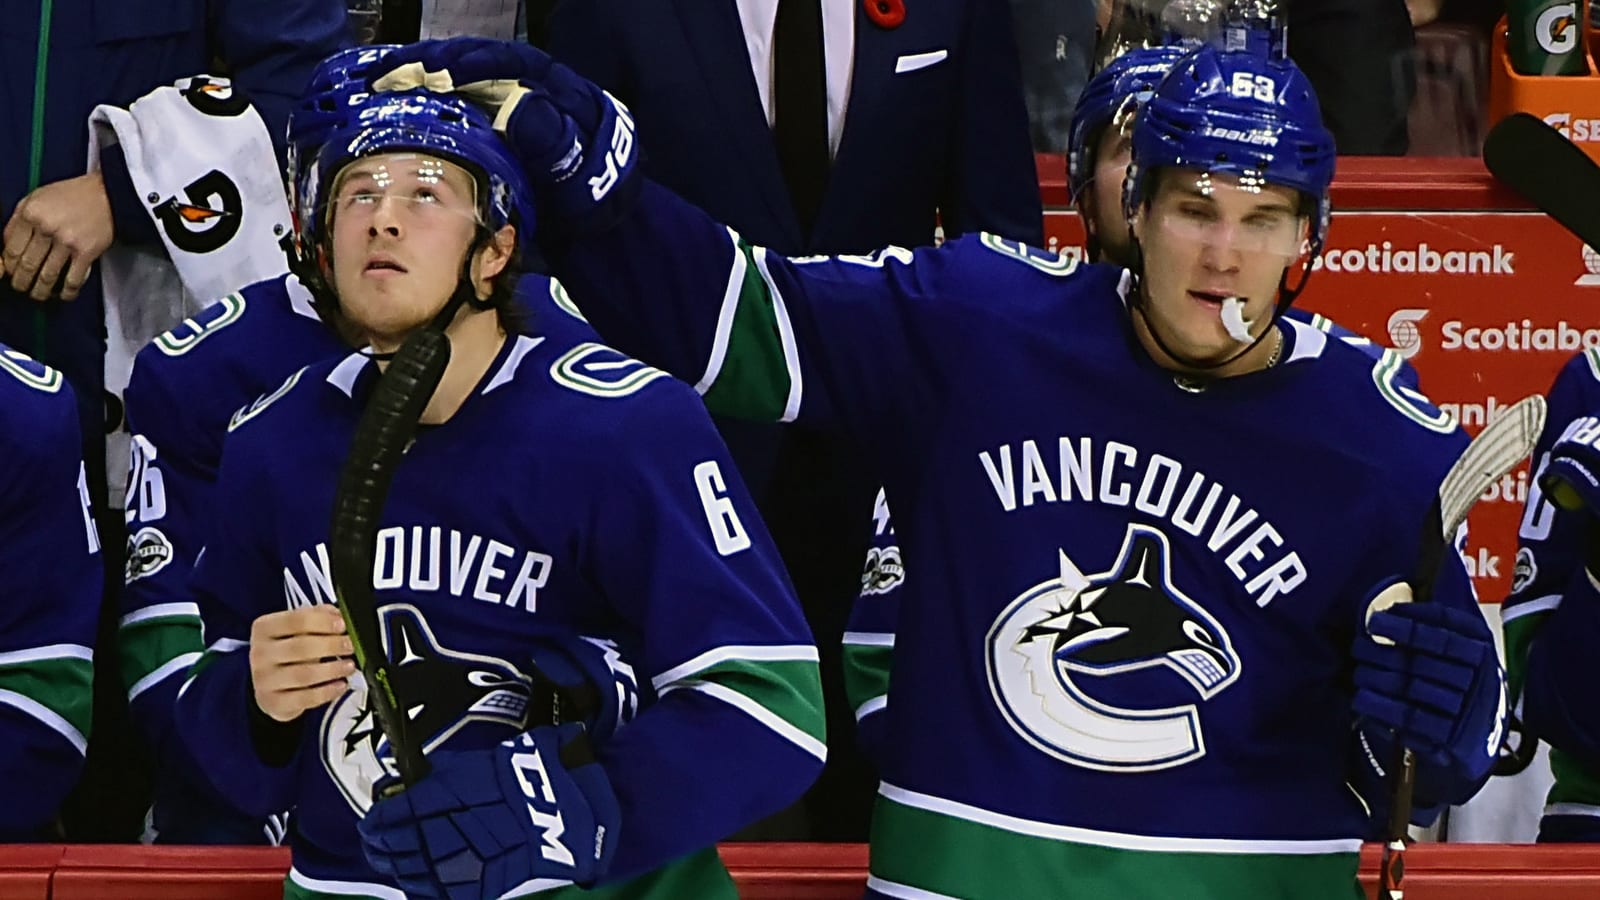 Canucks' future is fueled by a 'Brocket'